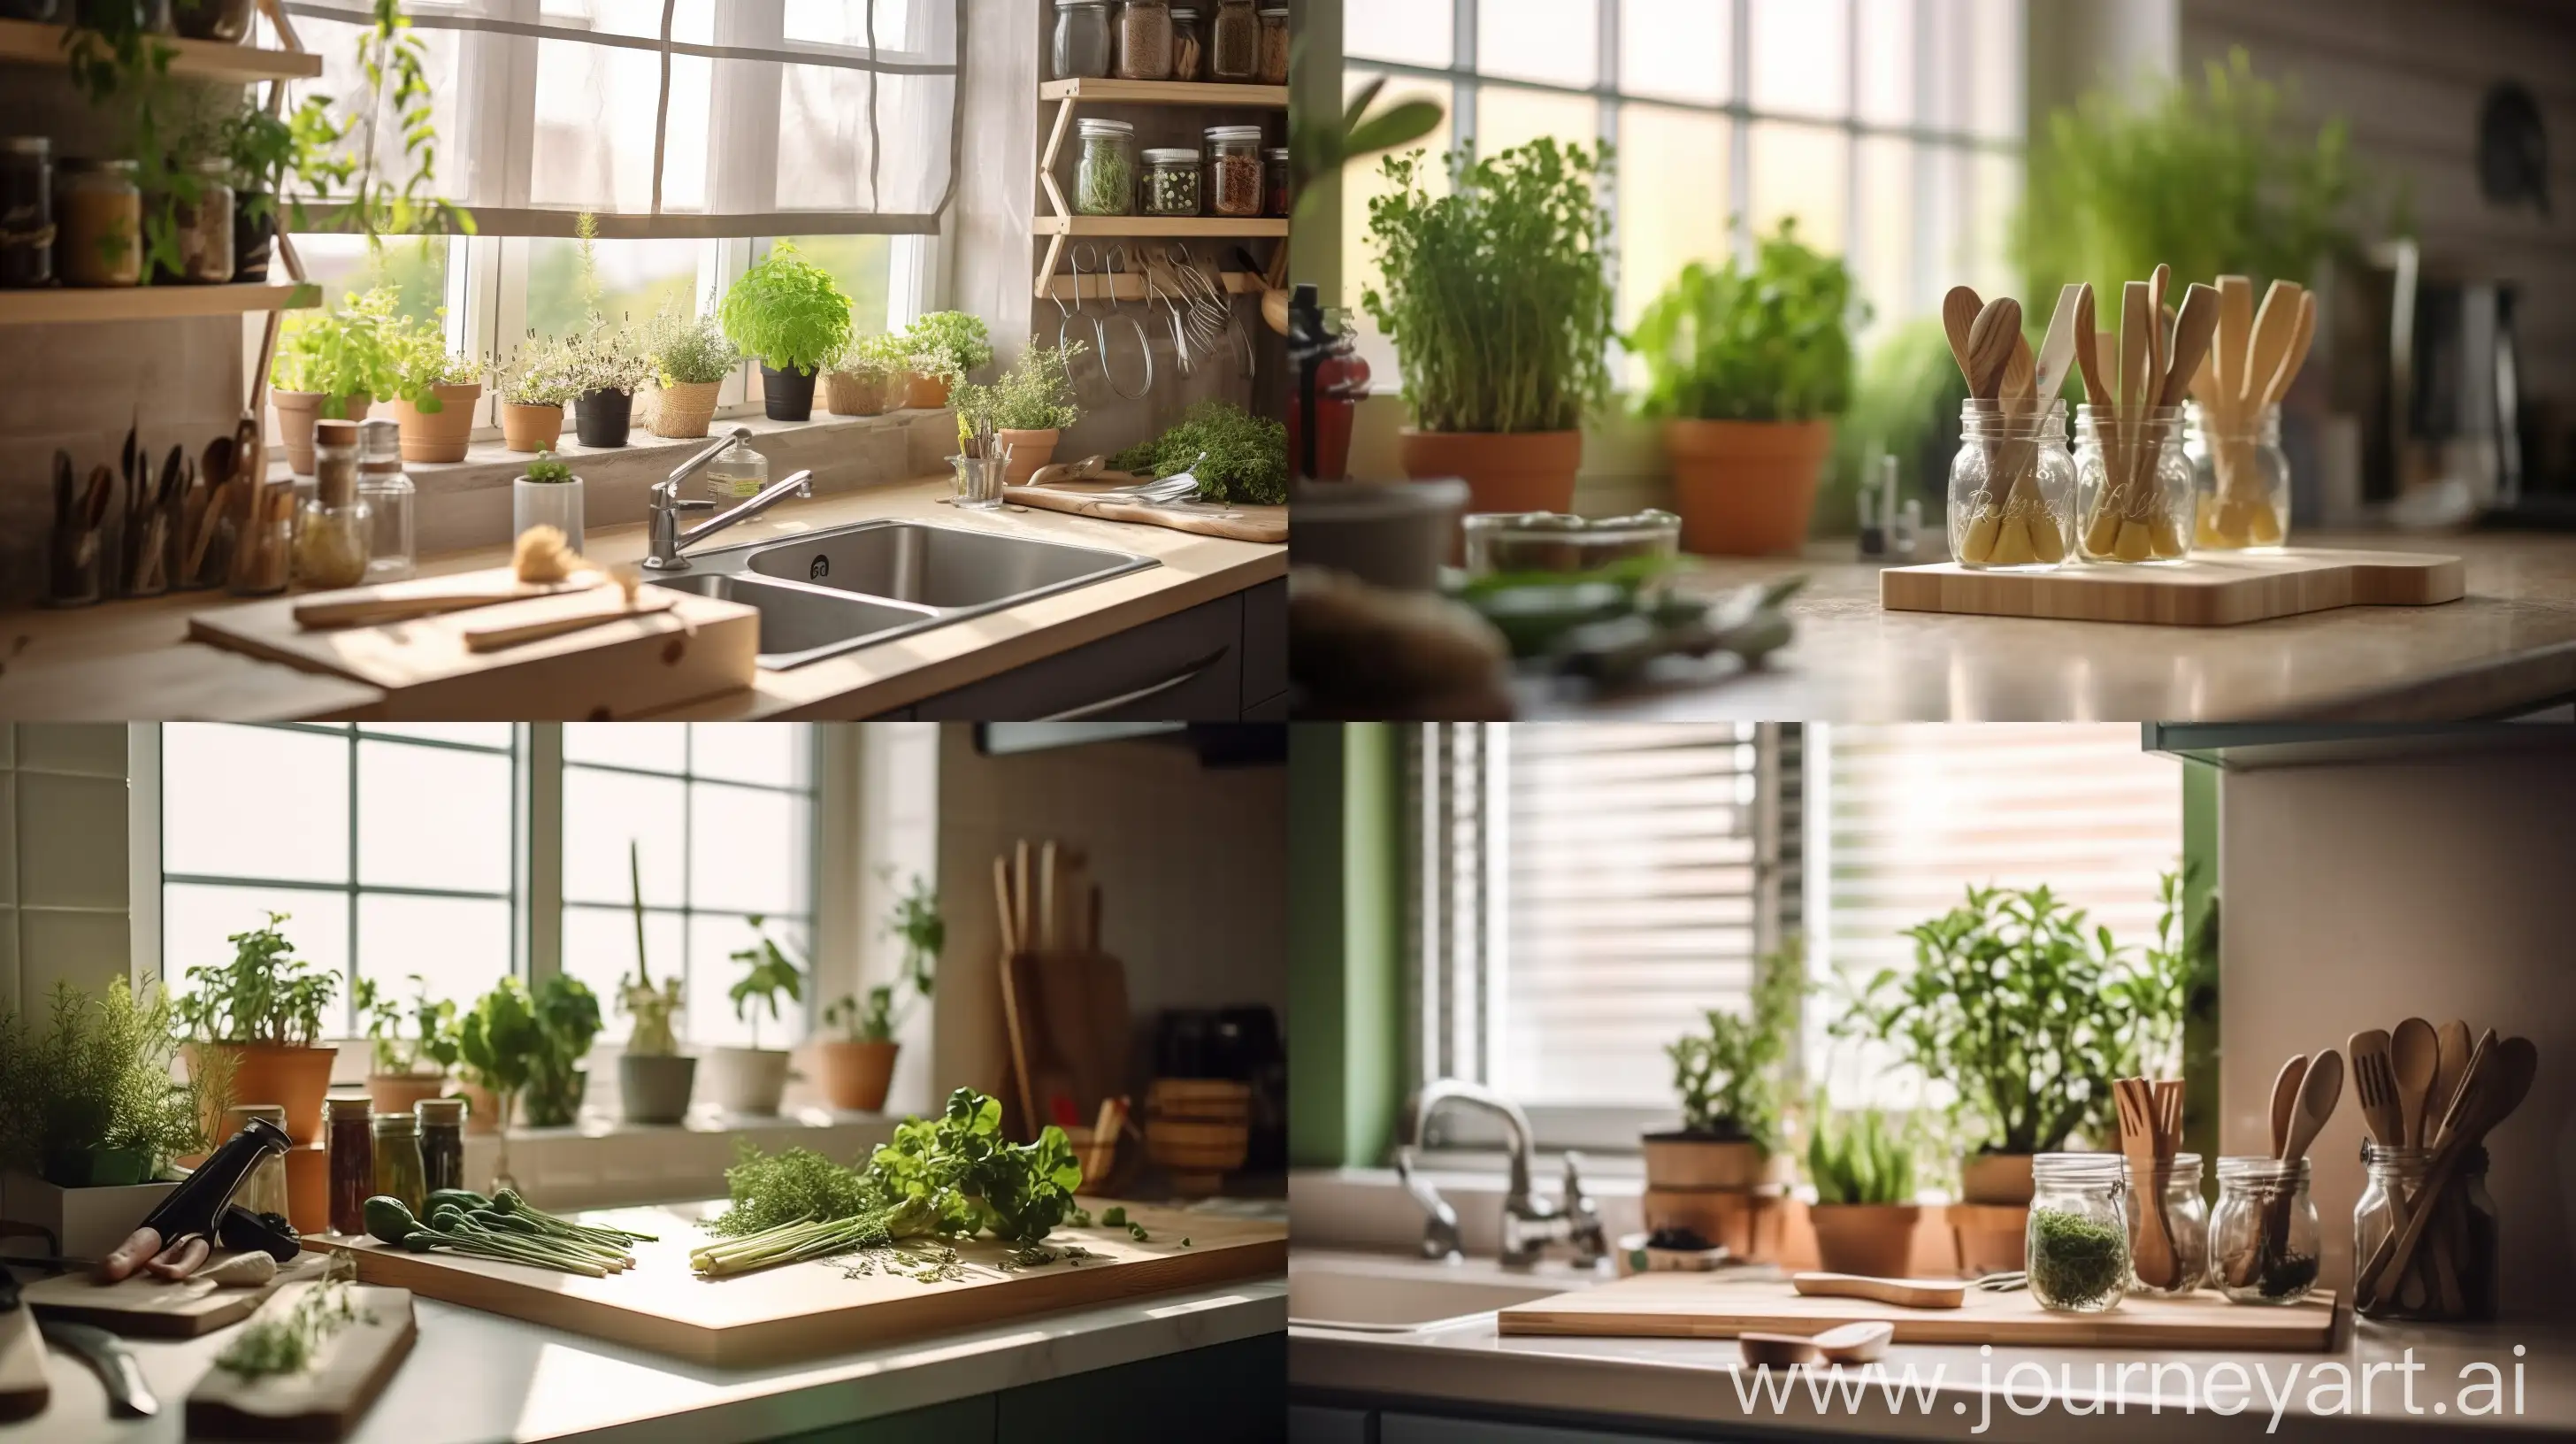 Sustainable-Living-EcoFriendly-Kitchen-with-Bamboo-Utensils-and-Herb-Garden